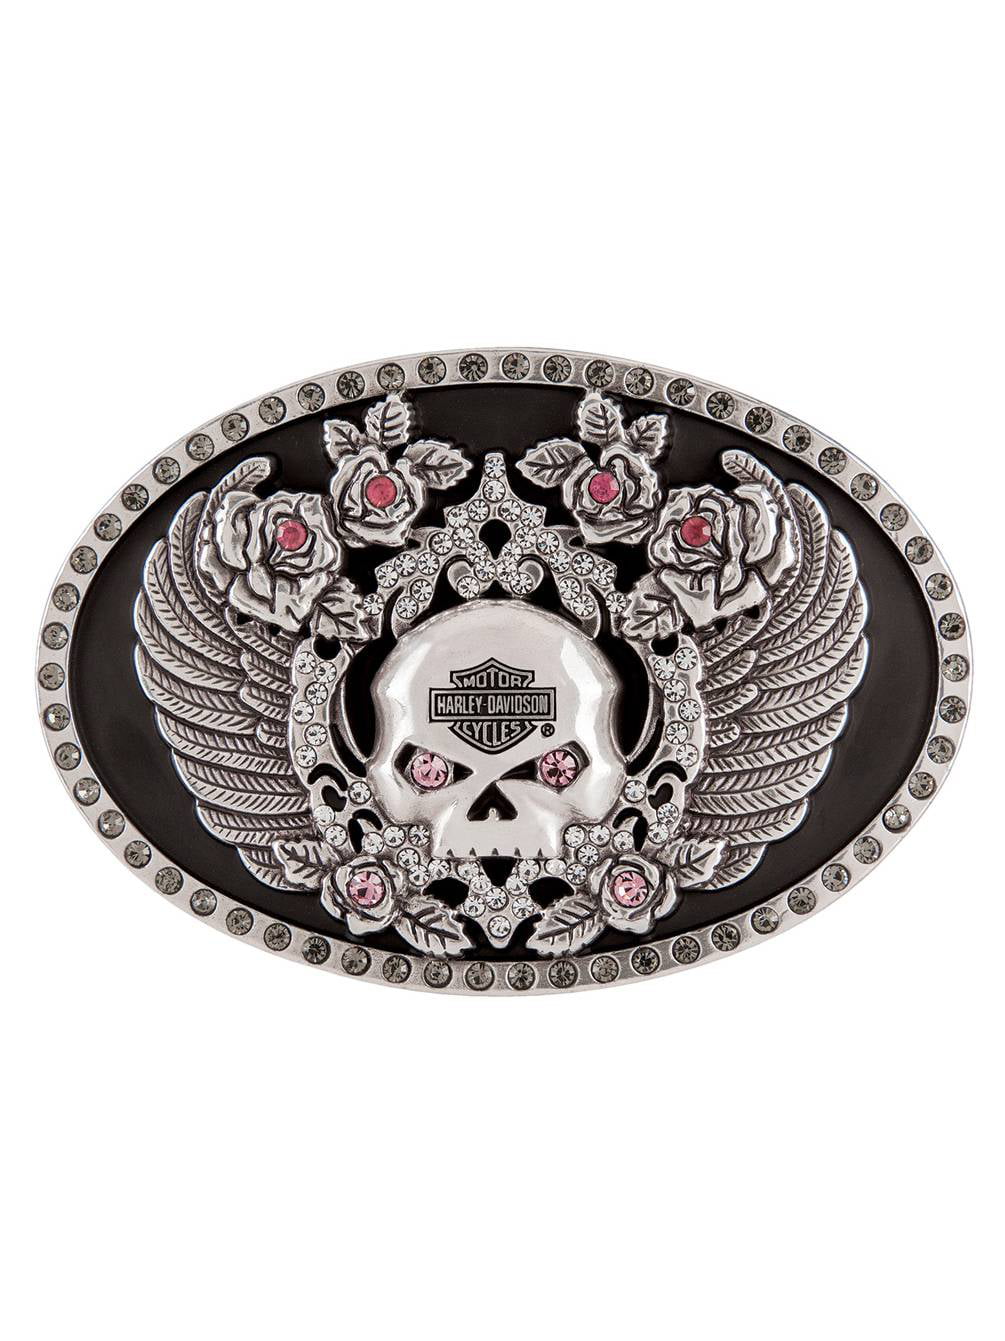 BEAUTIFUL BIKERS BELT BUCKLE WITH SKULL/FACE RHINESTONE NEW GREAT GIFT 